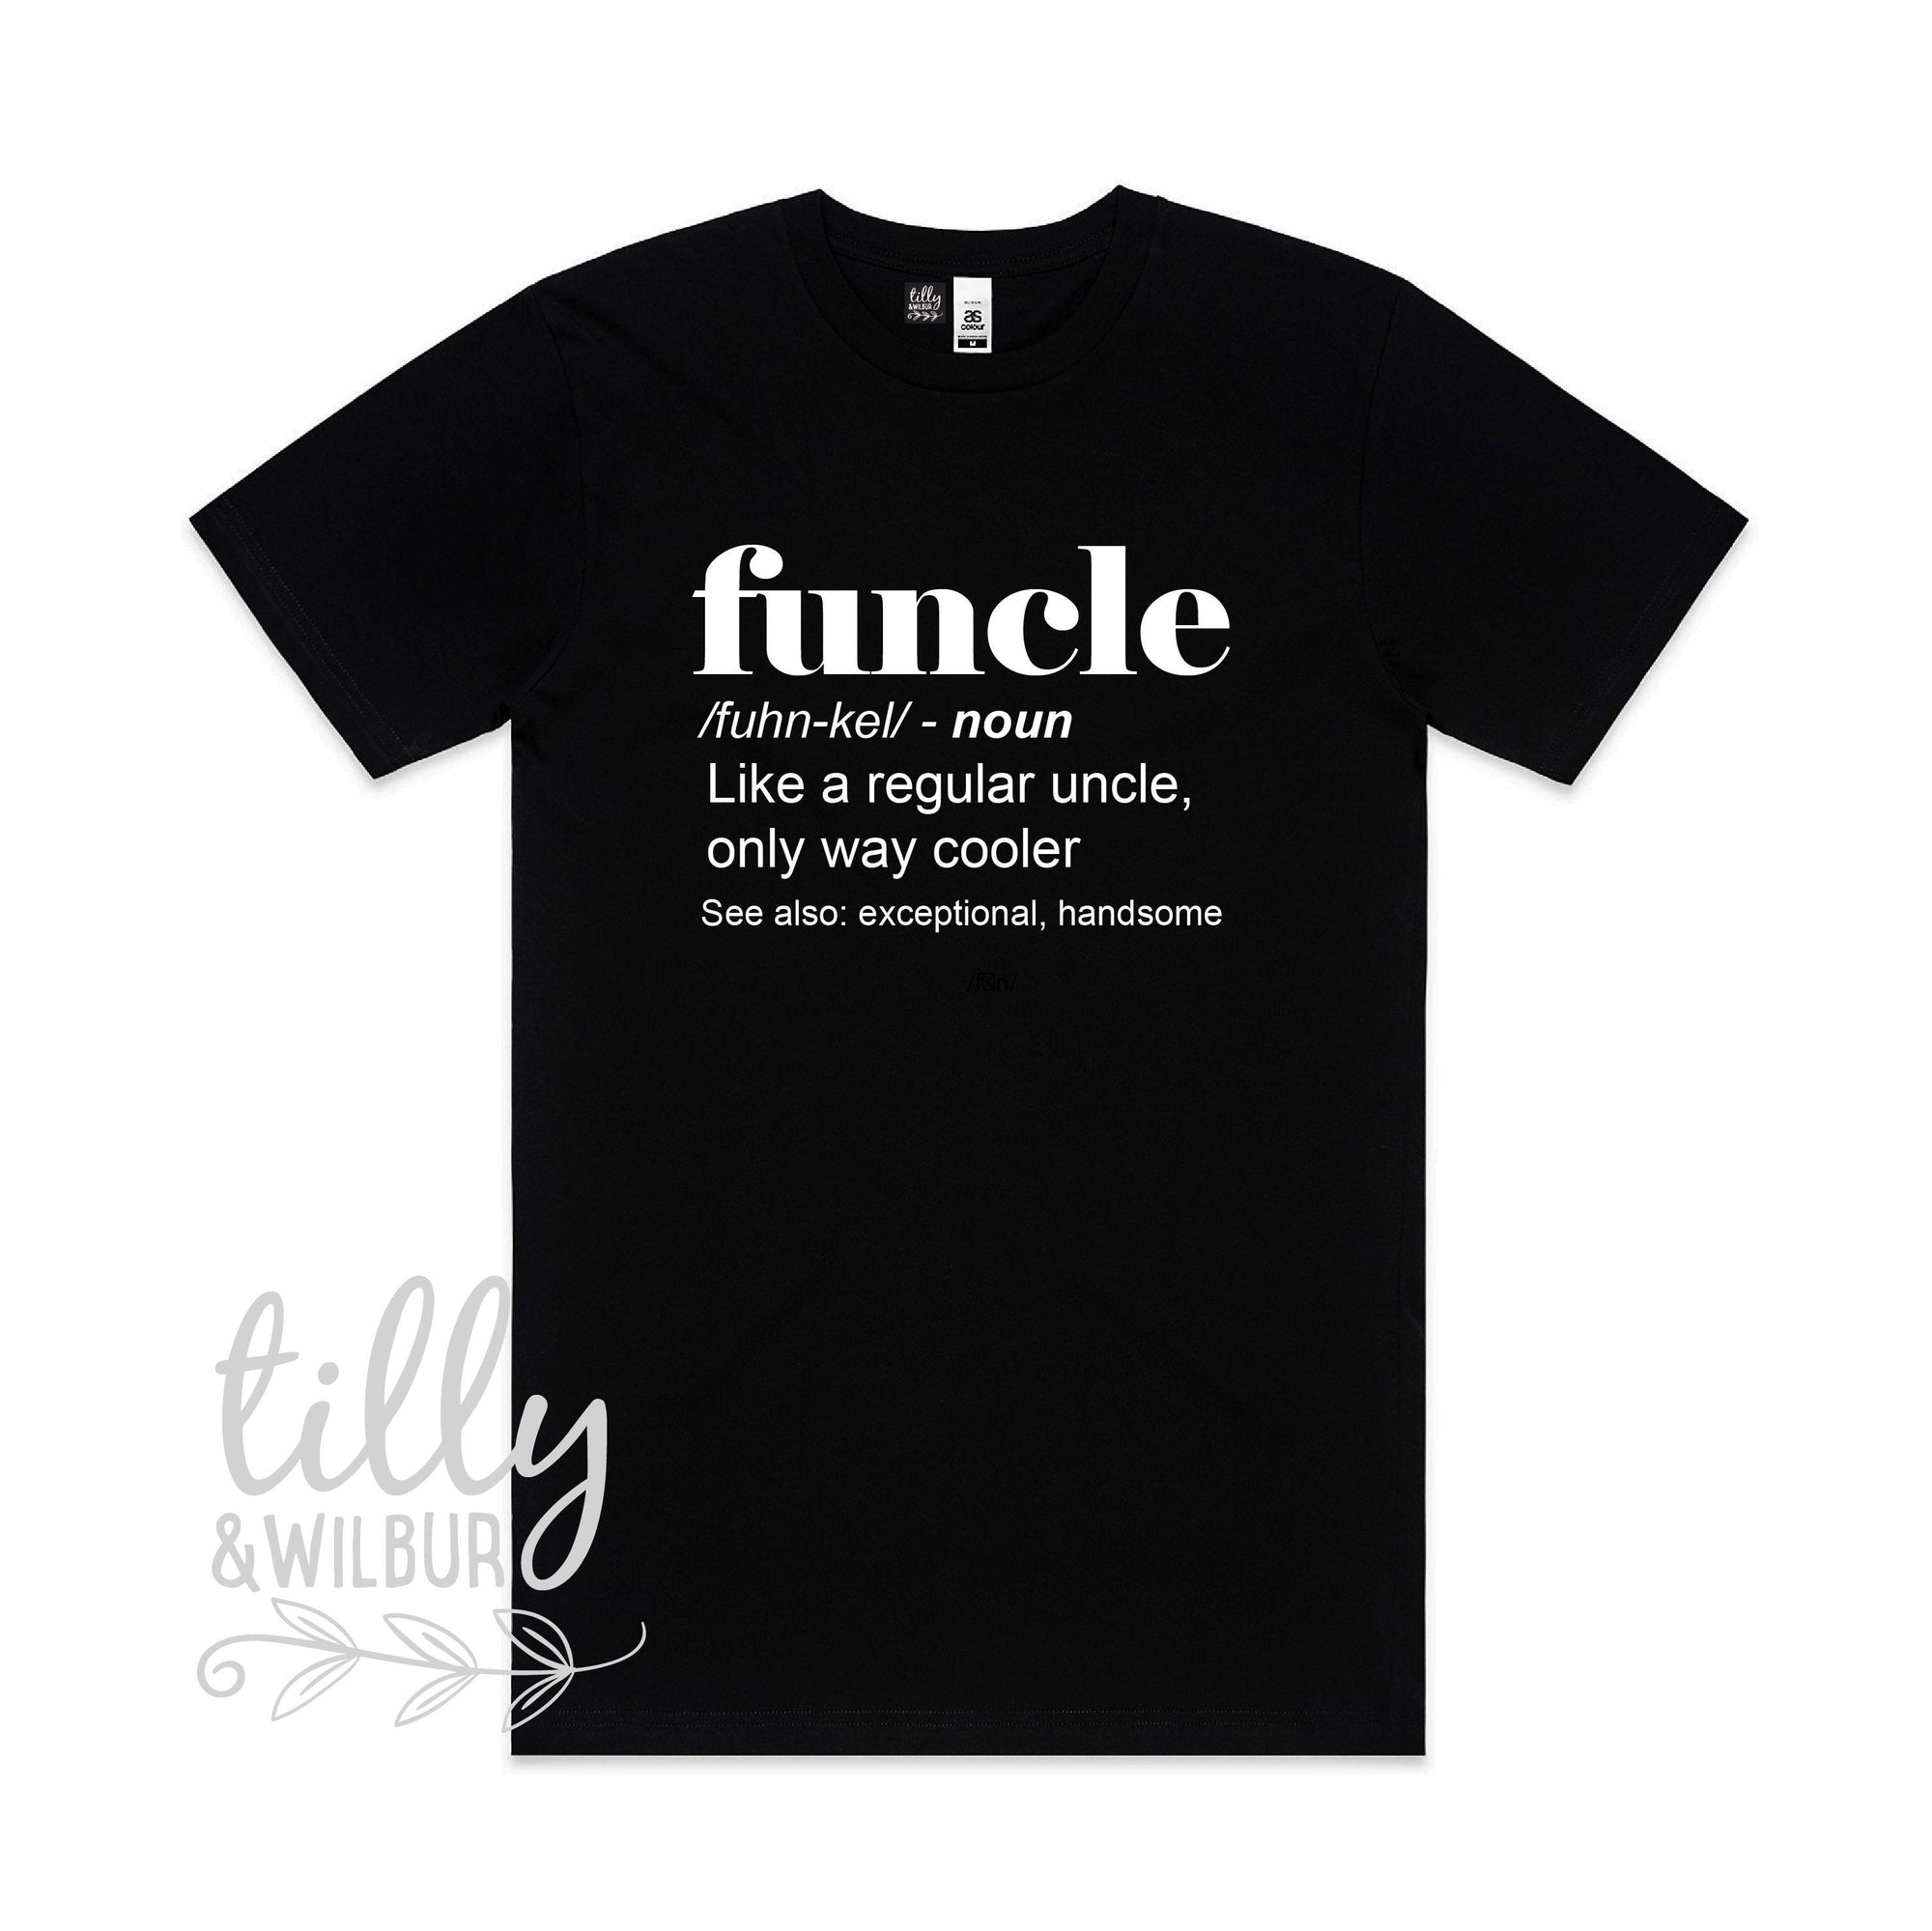 Funcle Just Like A Normal Uncle Only Way Cooler T-Shirt, Funny Uncle Gift, Uncle Christmas Shirt, New Uncle Gift, Uncle Shirt, Fun Uncle Tee